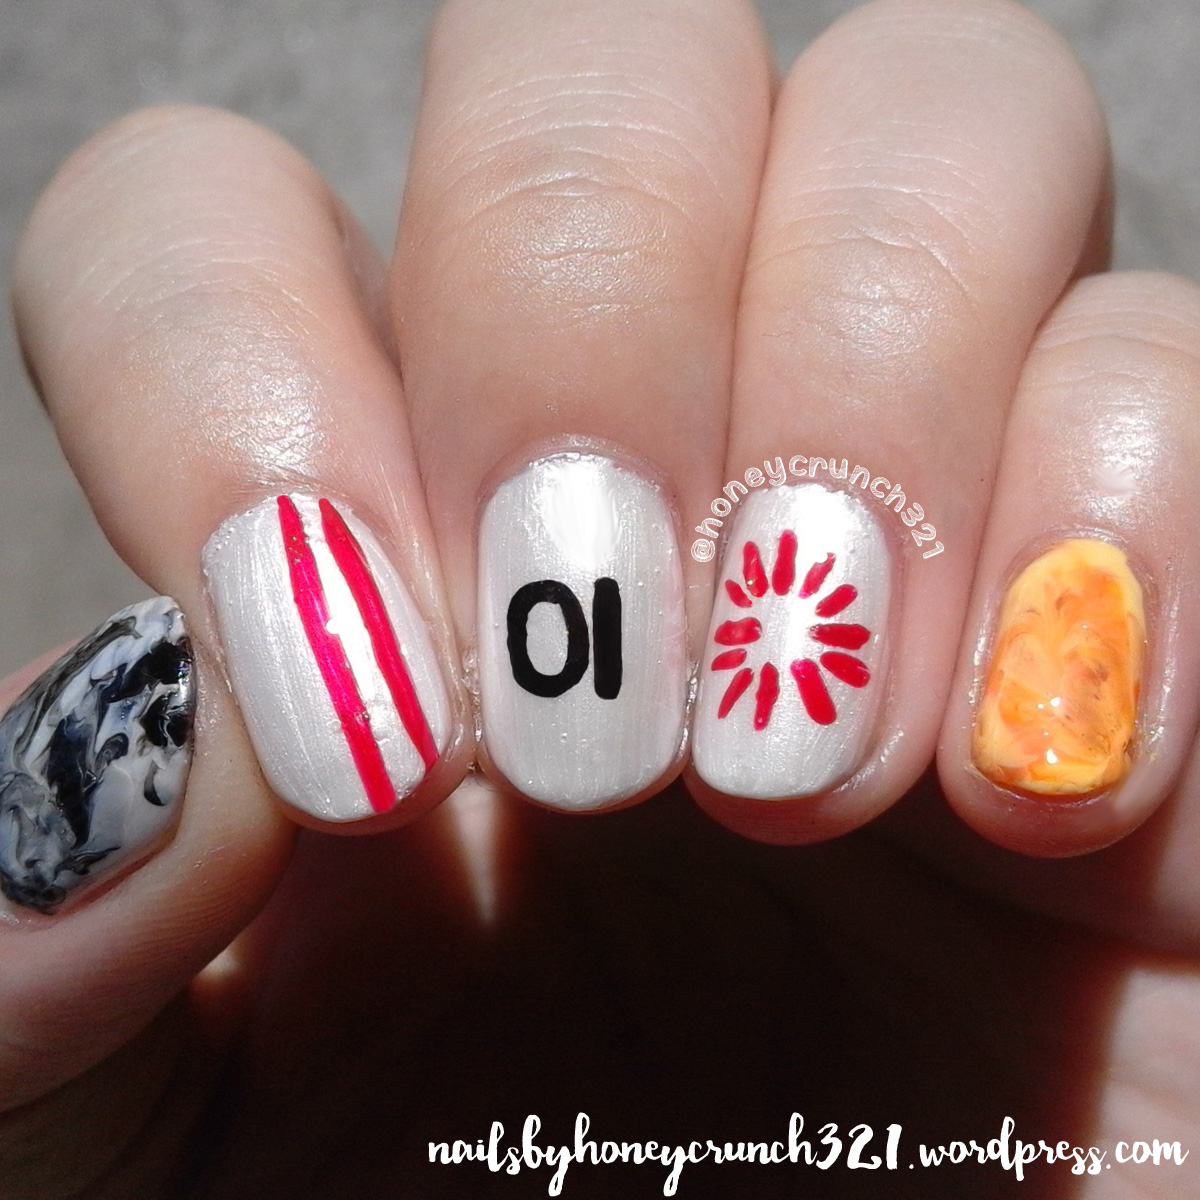 Kpop Nail Art - GDragon related and Galaxy Style Exo Nails | Facebook